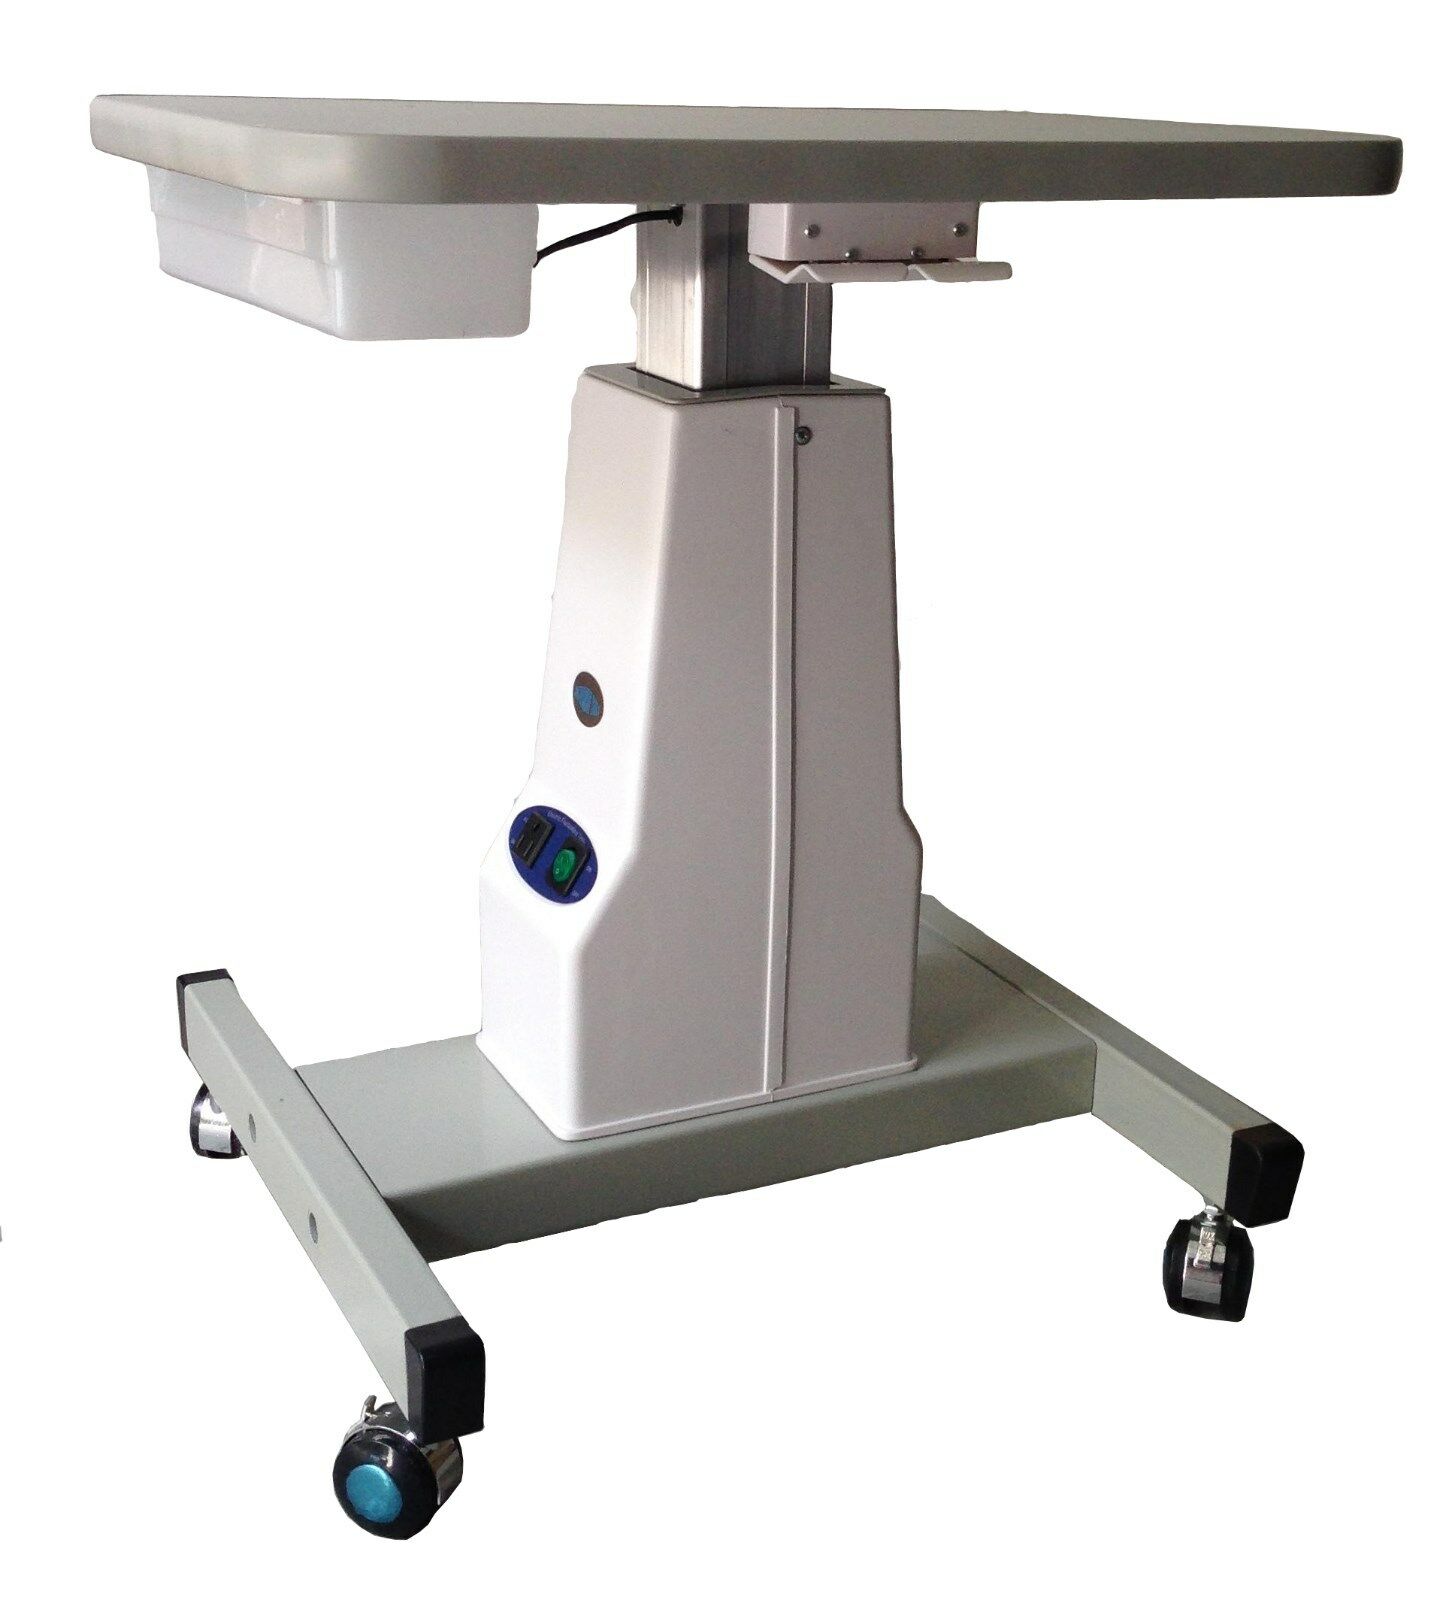 Bst-a16 Motorized Table For Optician Eyecare Instrument Table Support 150+ Lbs.